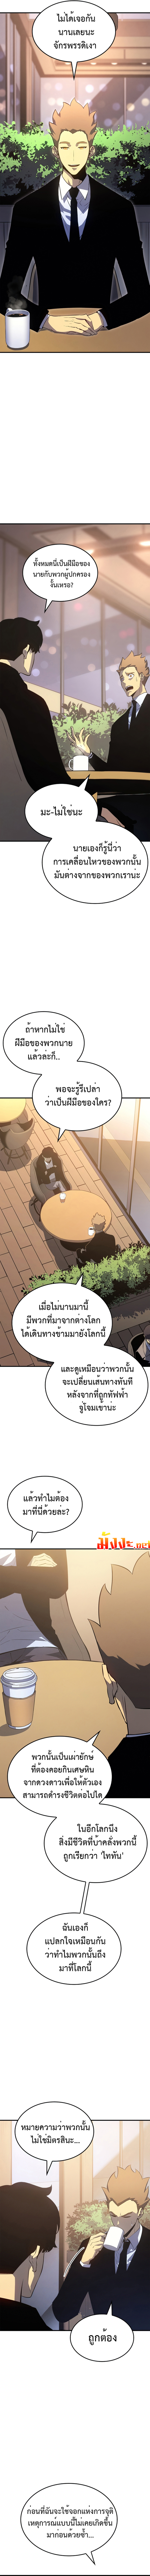 Solo Leveling ตอนที่ 183